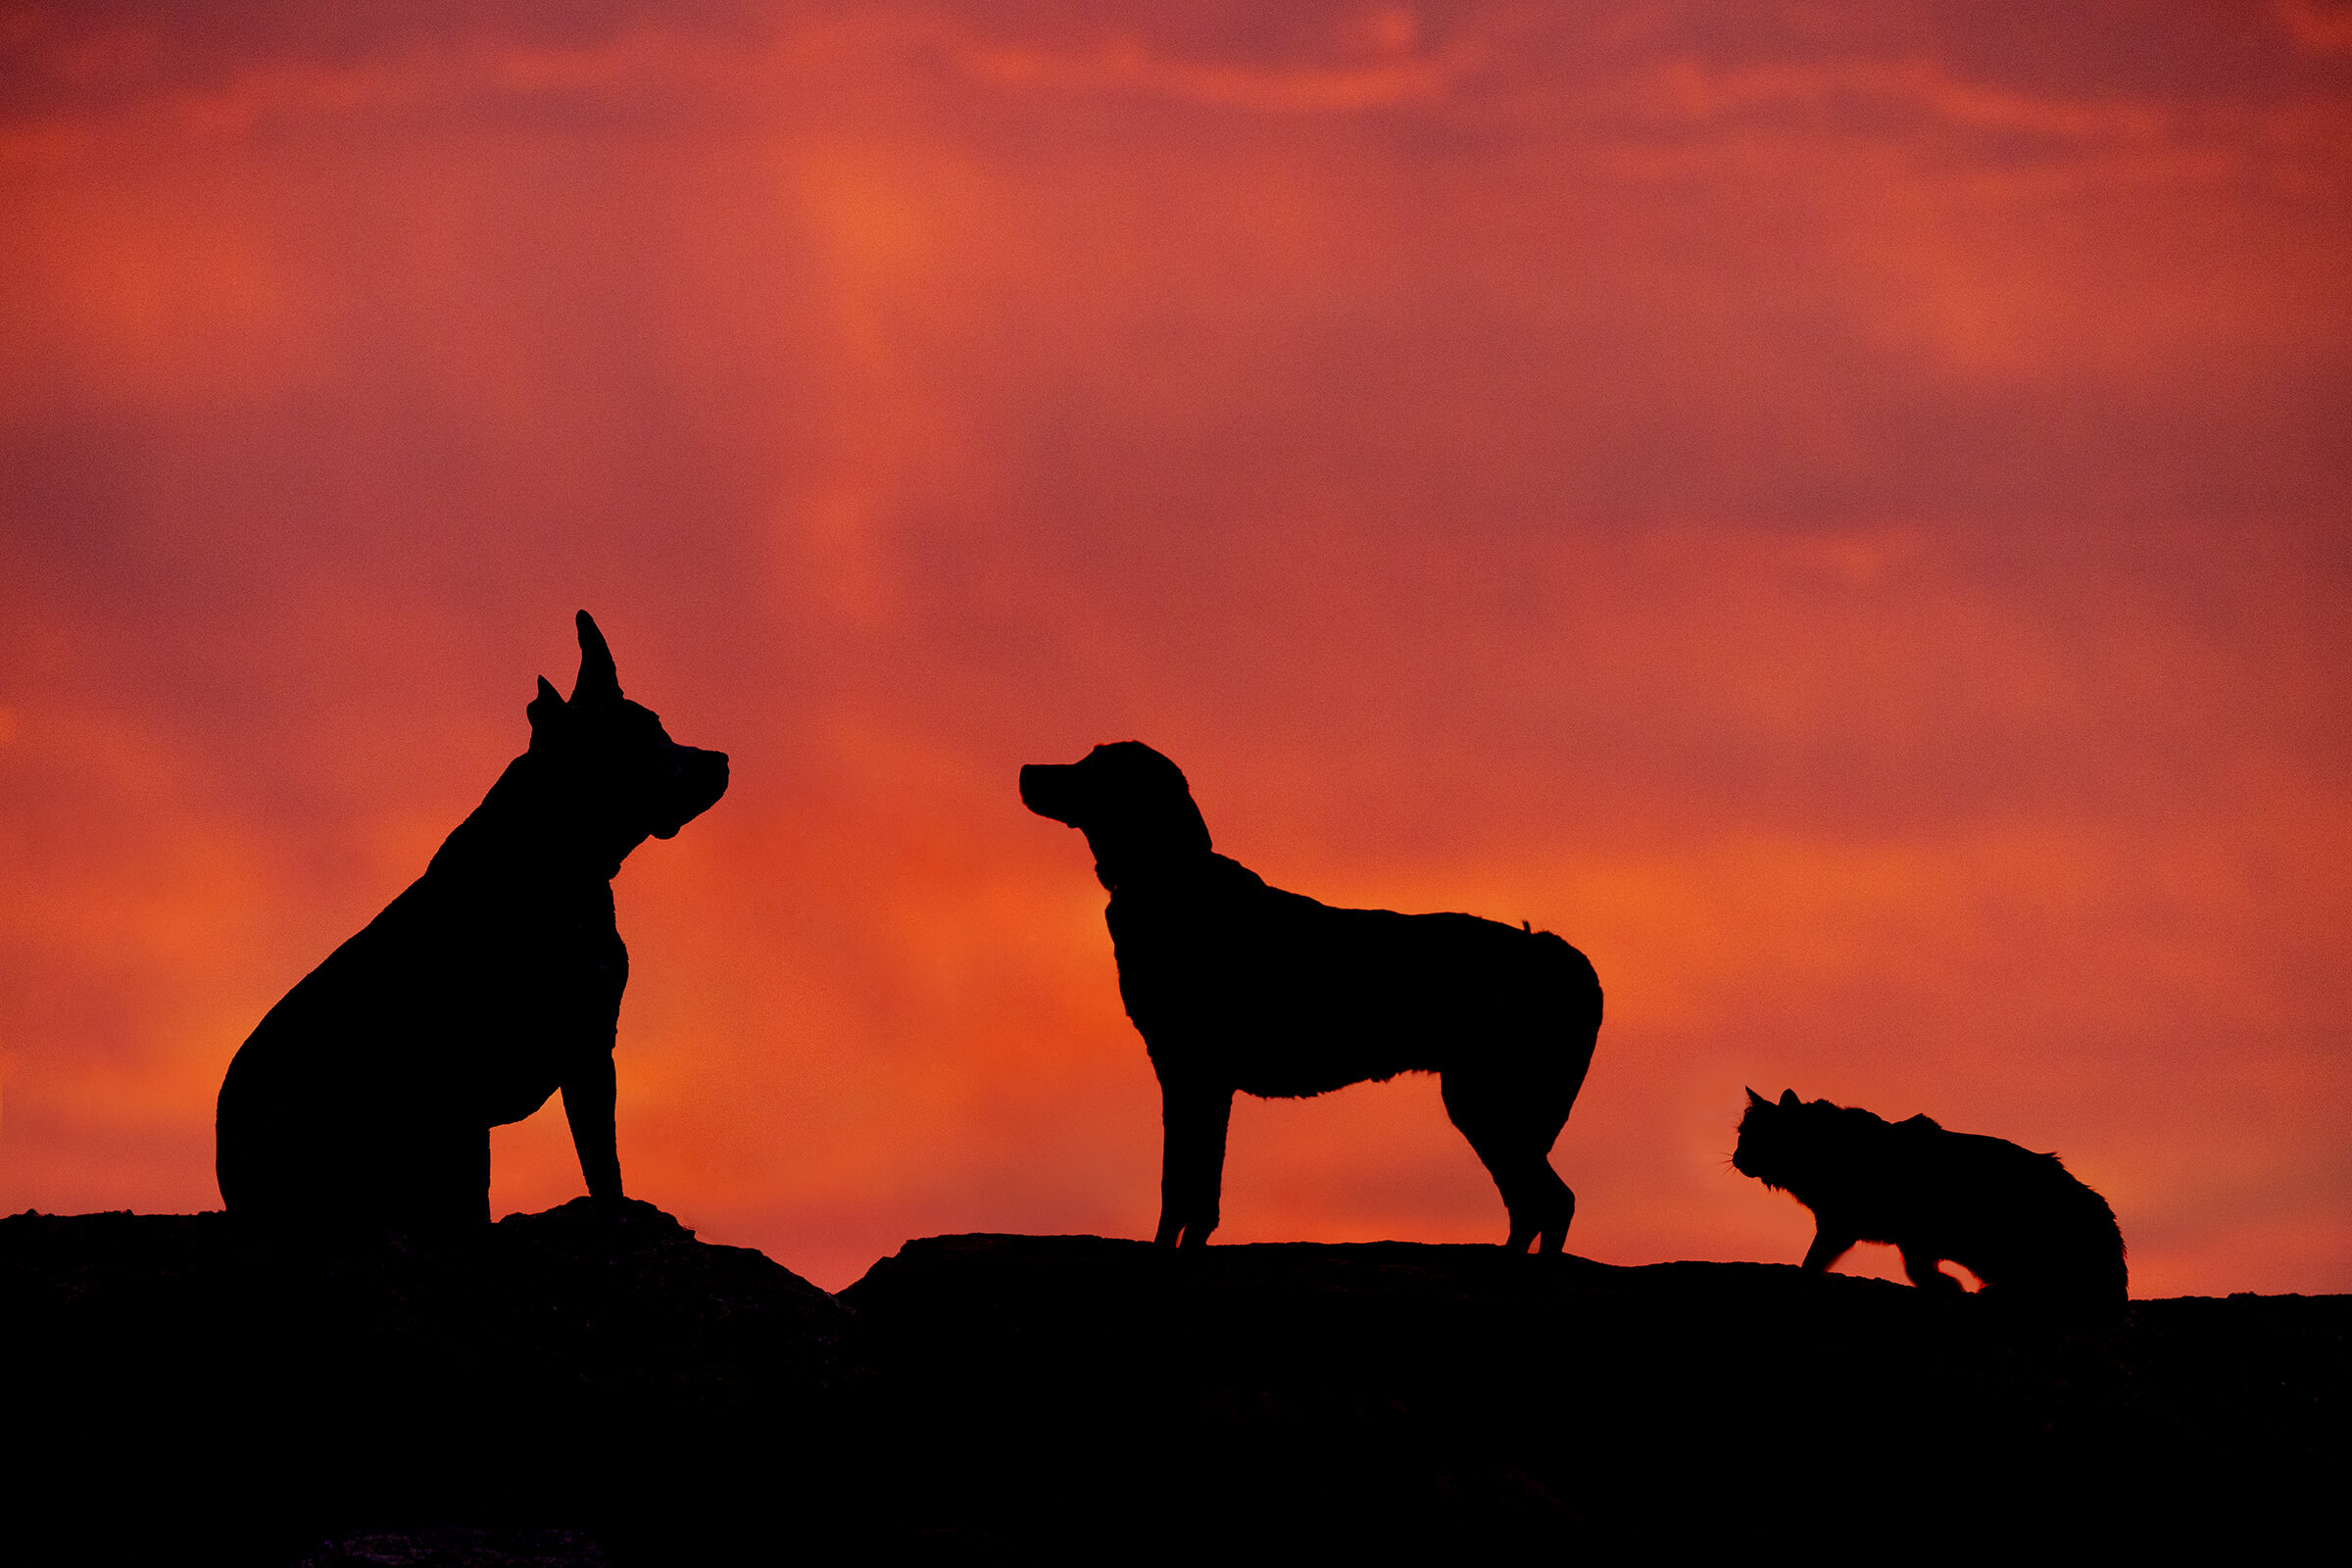 2 dogs and 1 cat in silhouette at sunrise in Toronto